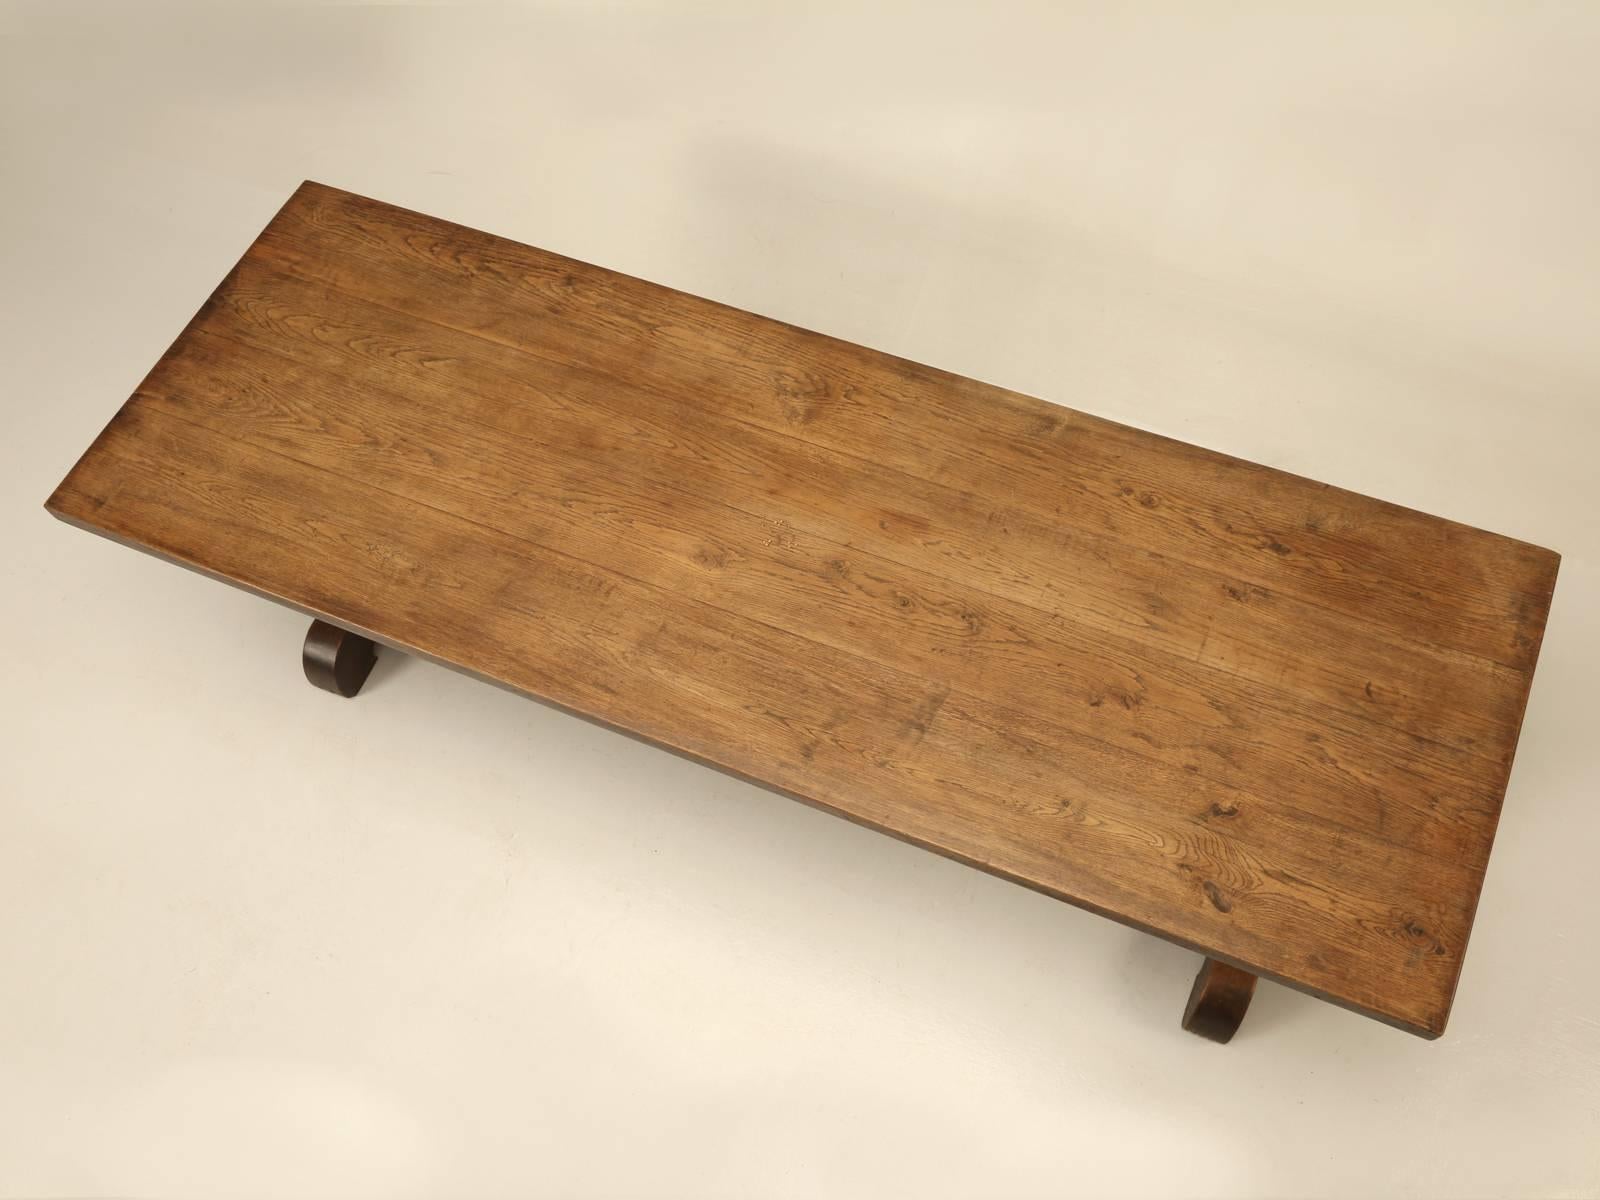 French solid oak trestle table, with the most unusual stretcher connecting the trestles and if that was not different enough, look at the copper flower inlay on the tabletop. This must have been made for someone very special and it looks like it was